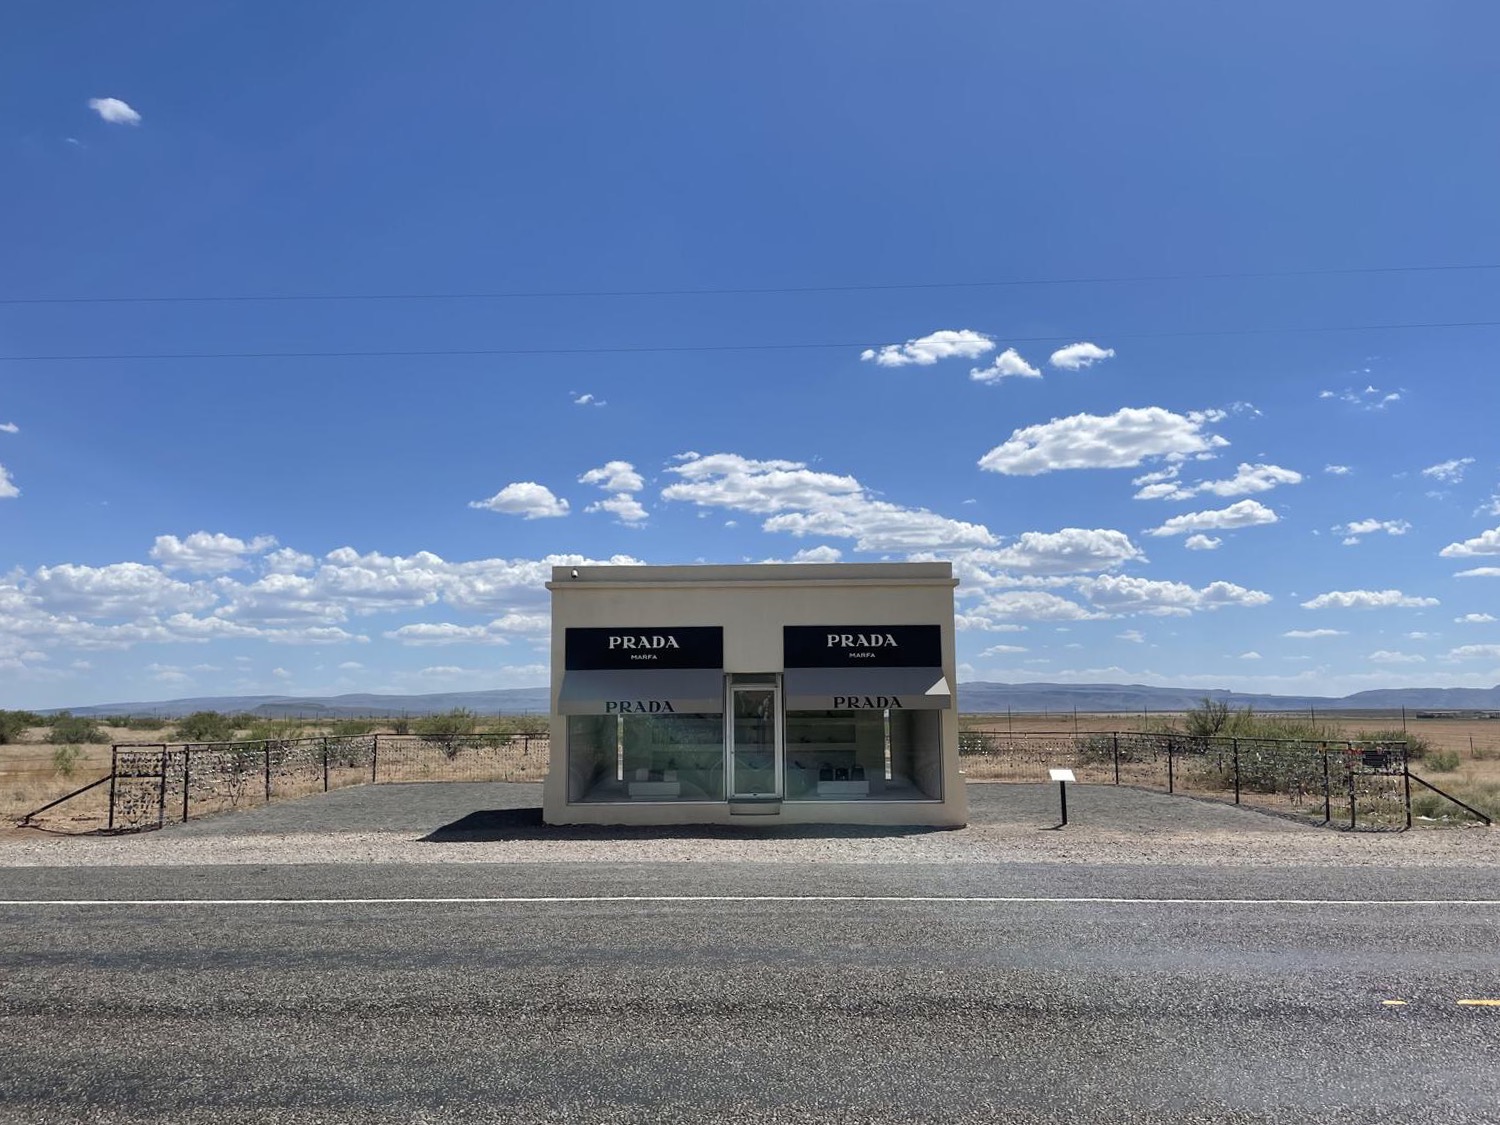 A small Prada-branded boutique in the middle of the desert